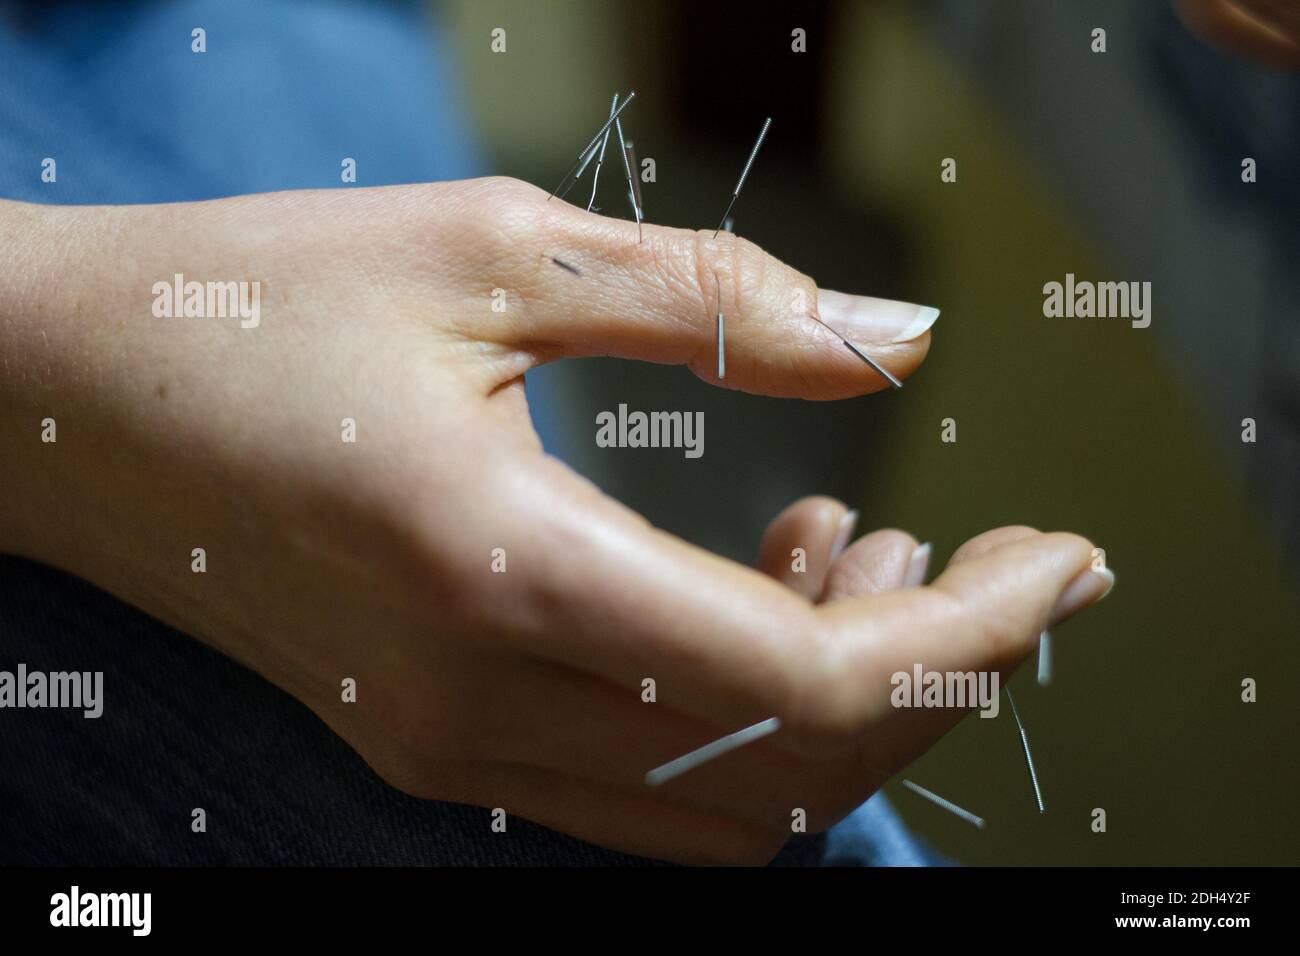 Close-up of female hand with acupuncture needles, alternative treatments, selective focus Stock Photo